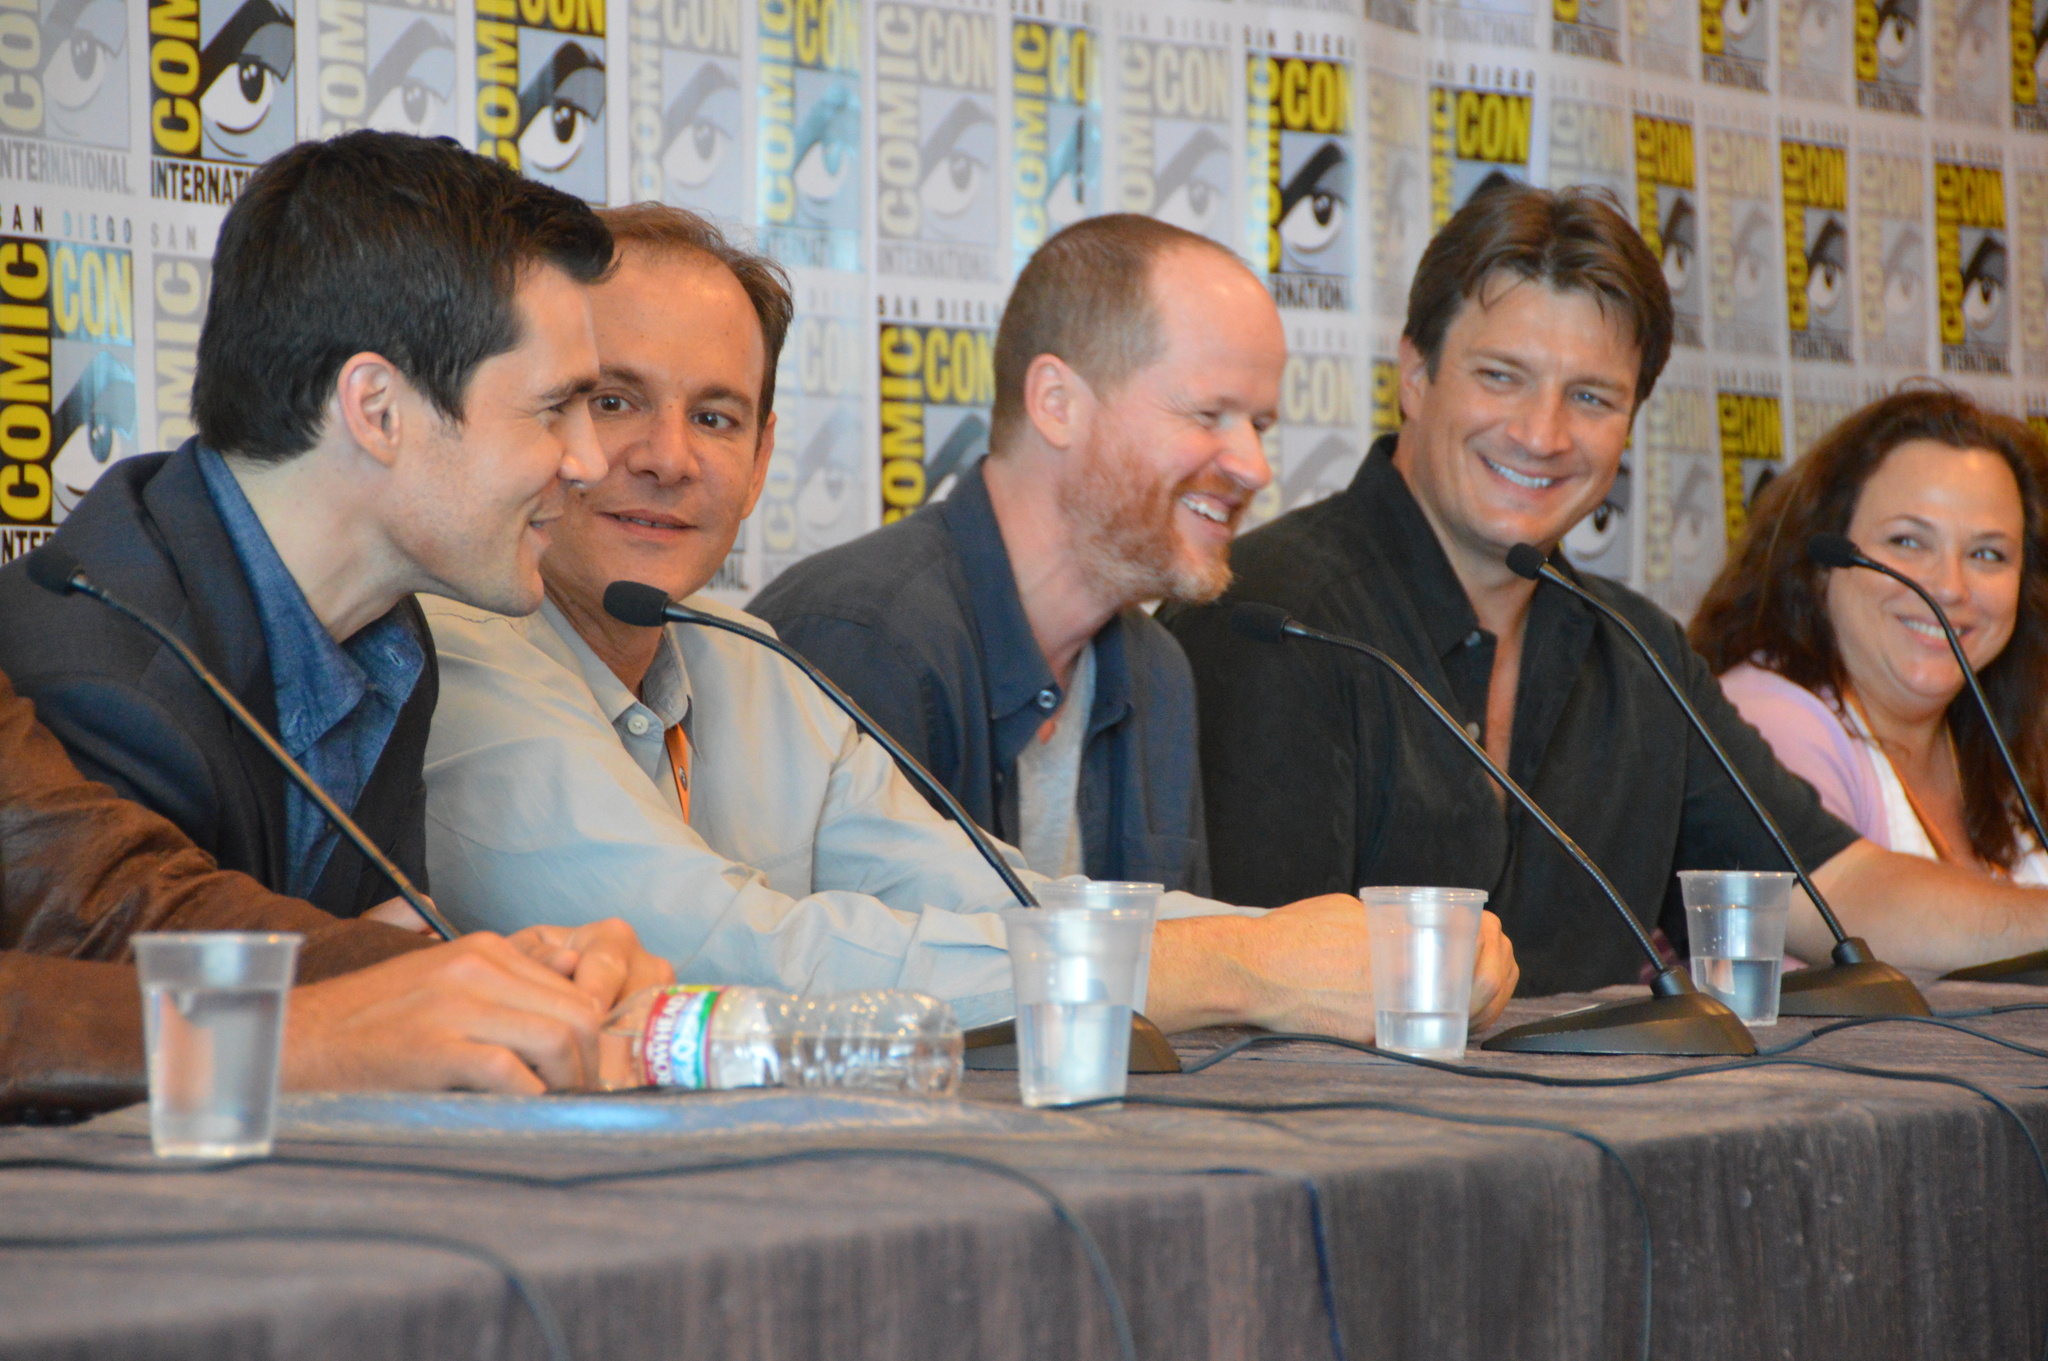 Nathan Fillion, Sean Maher and Joss Whedon at event of Firefly (2002)